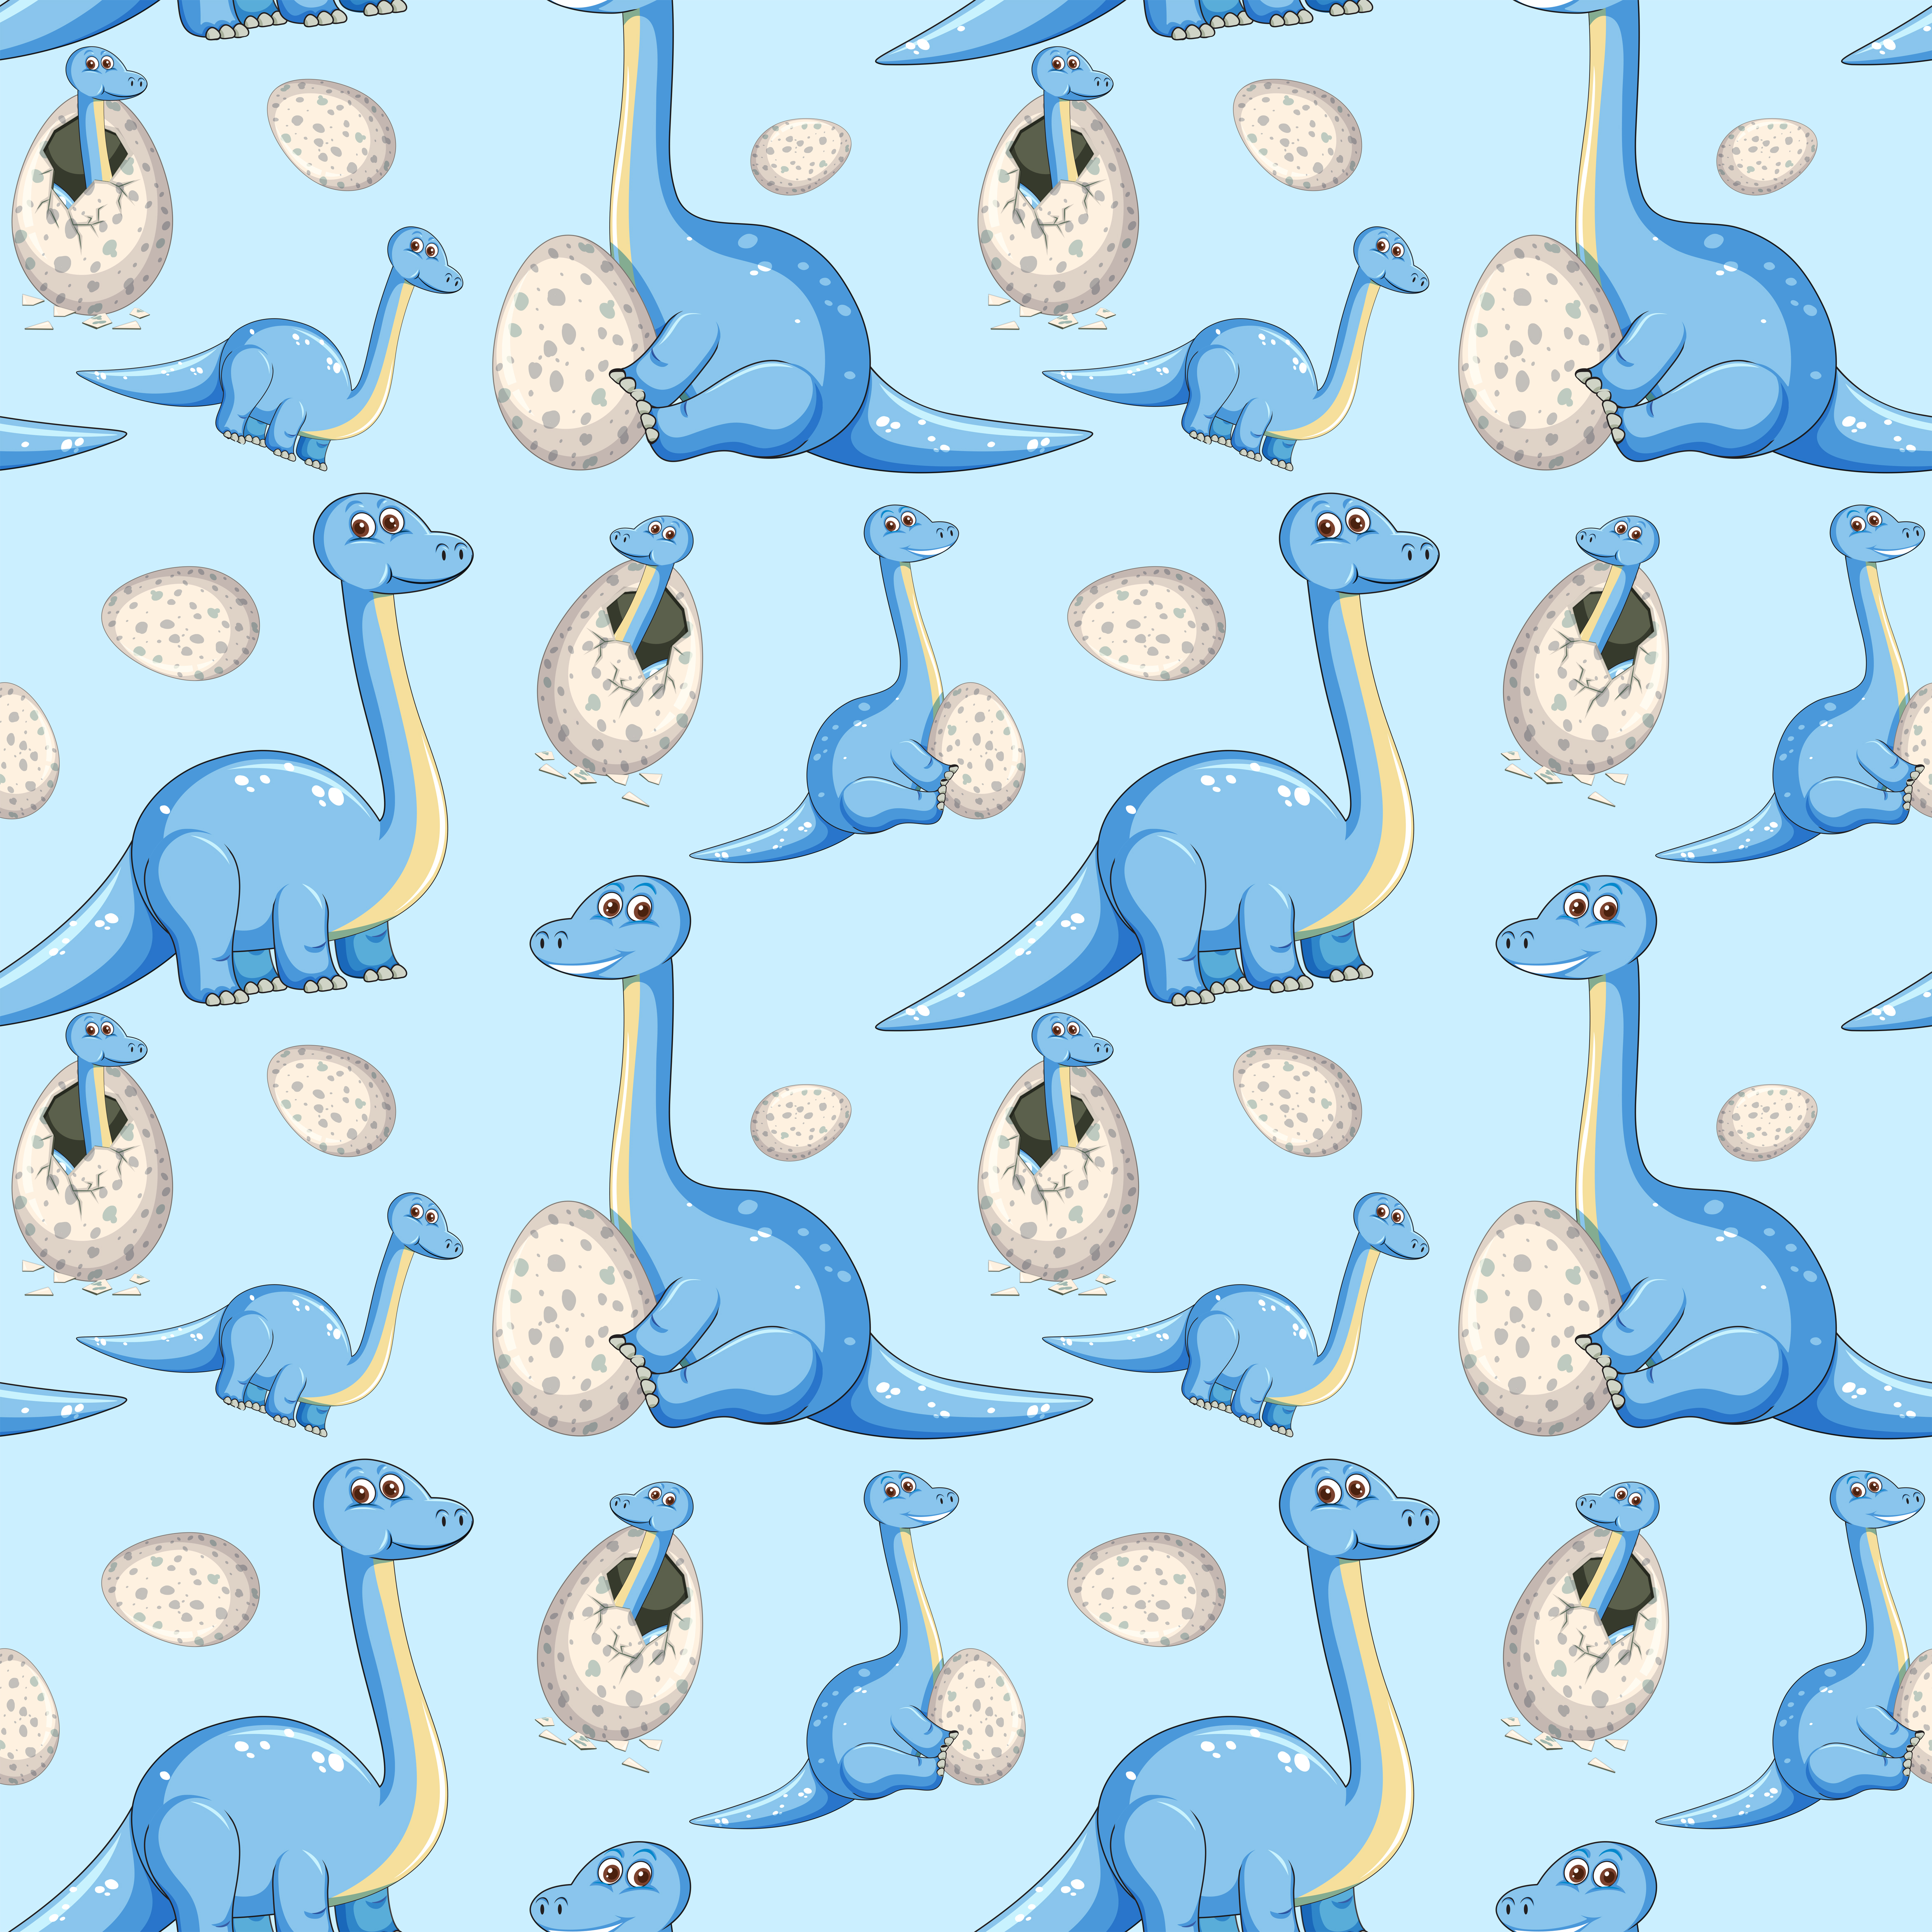 Free download Cute baby dinosaur seamless pattern on the light blue  background 1300x1390 for your Desktop Mobile  Tablet  Explore 16 Baby Dinosaur  Wallpapers  Dinosaur Wallpaper Dinosaur Desktop Wallpaper Cool Dinosaur  Wallpaper